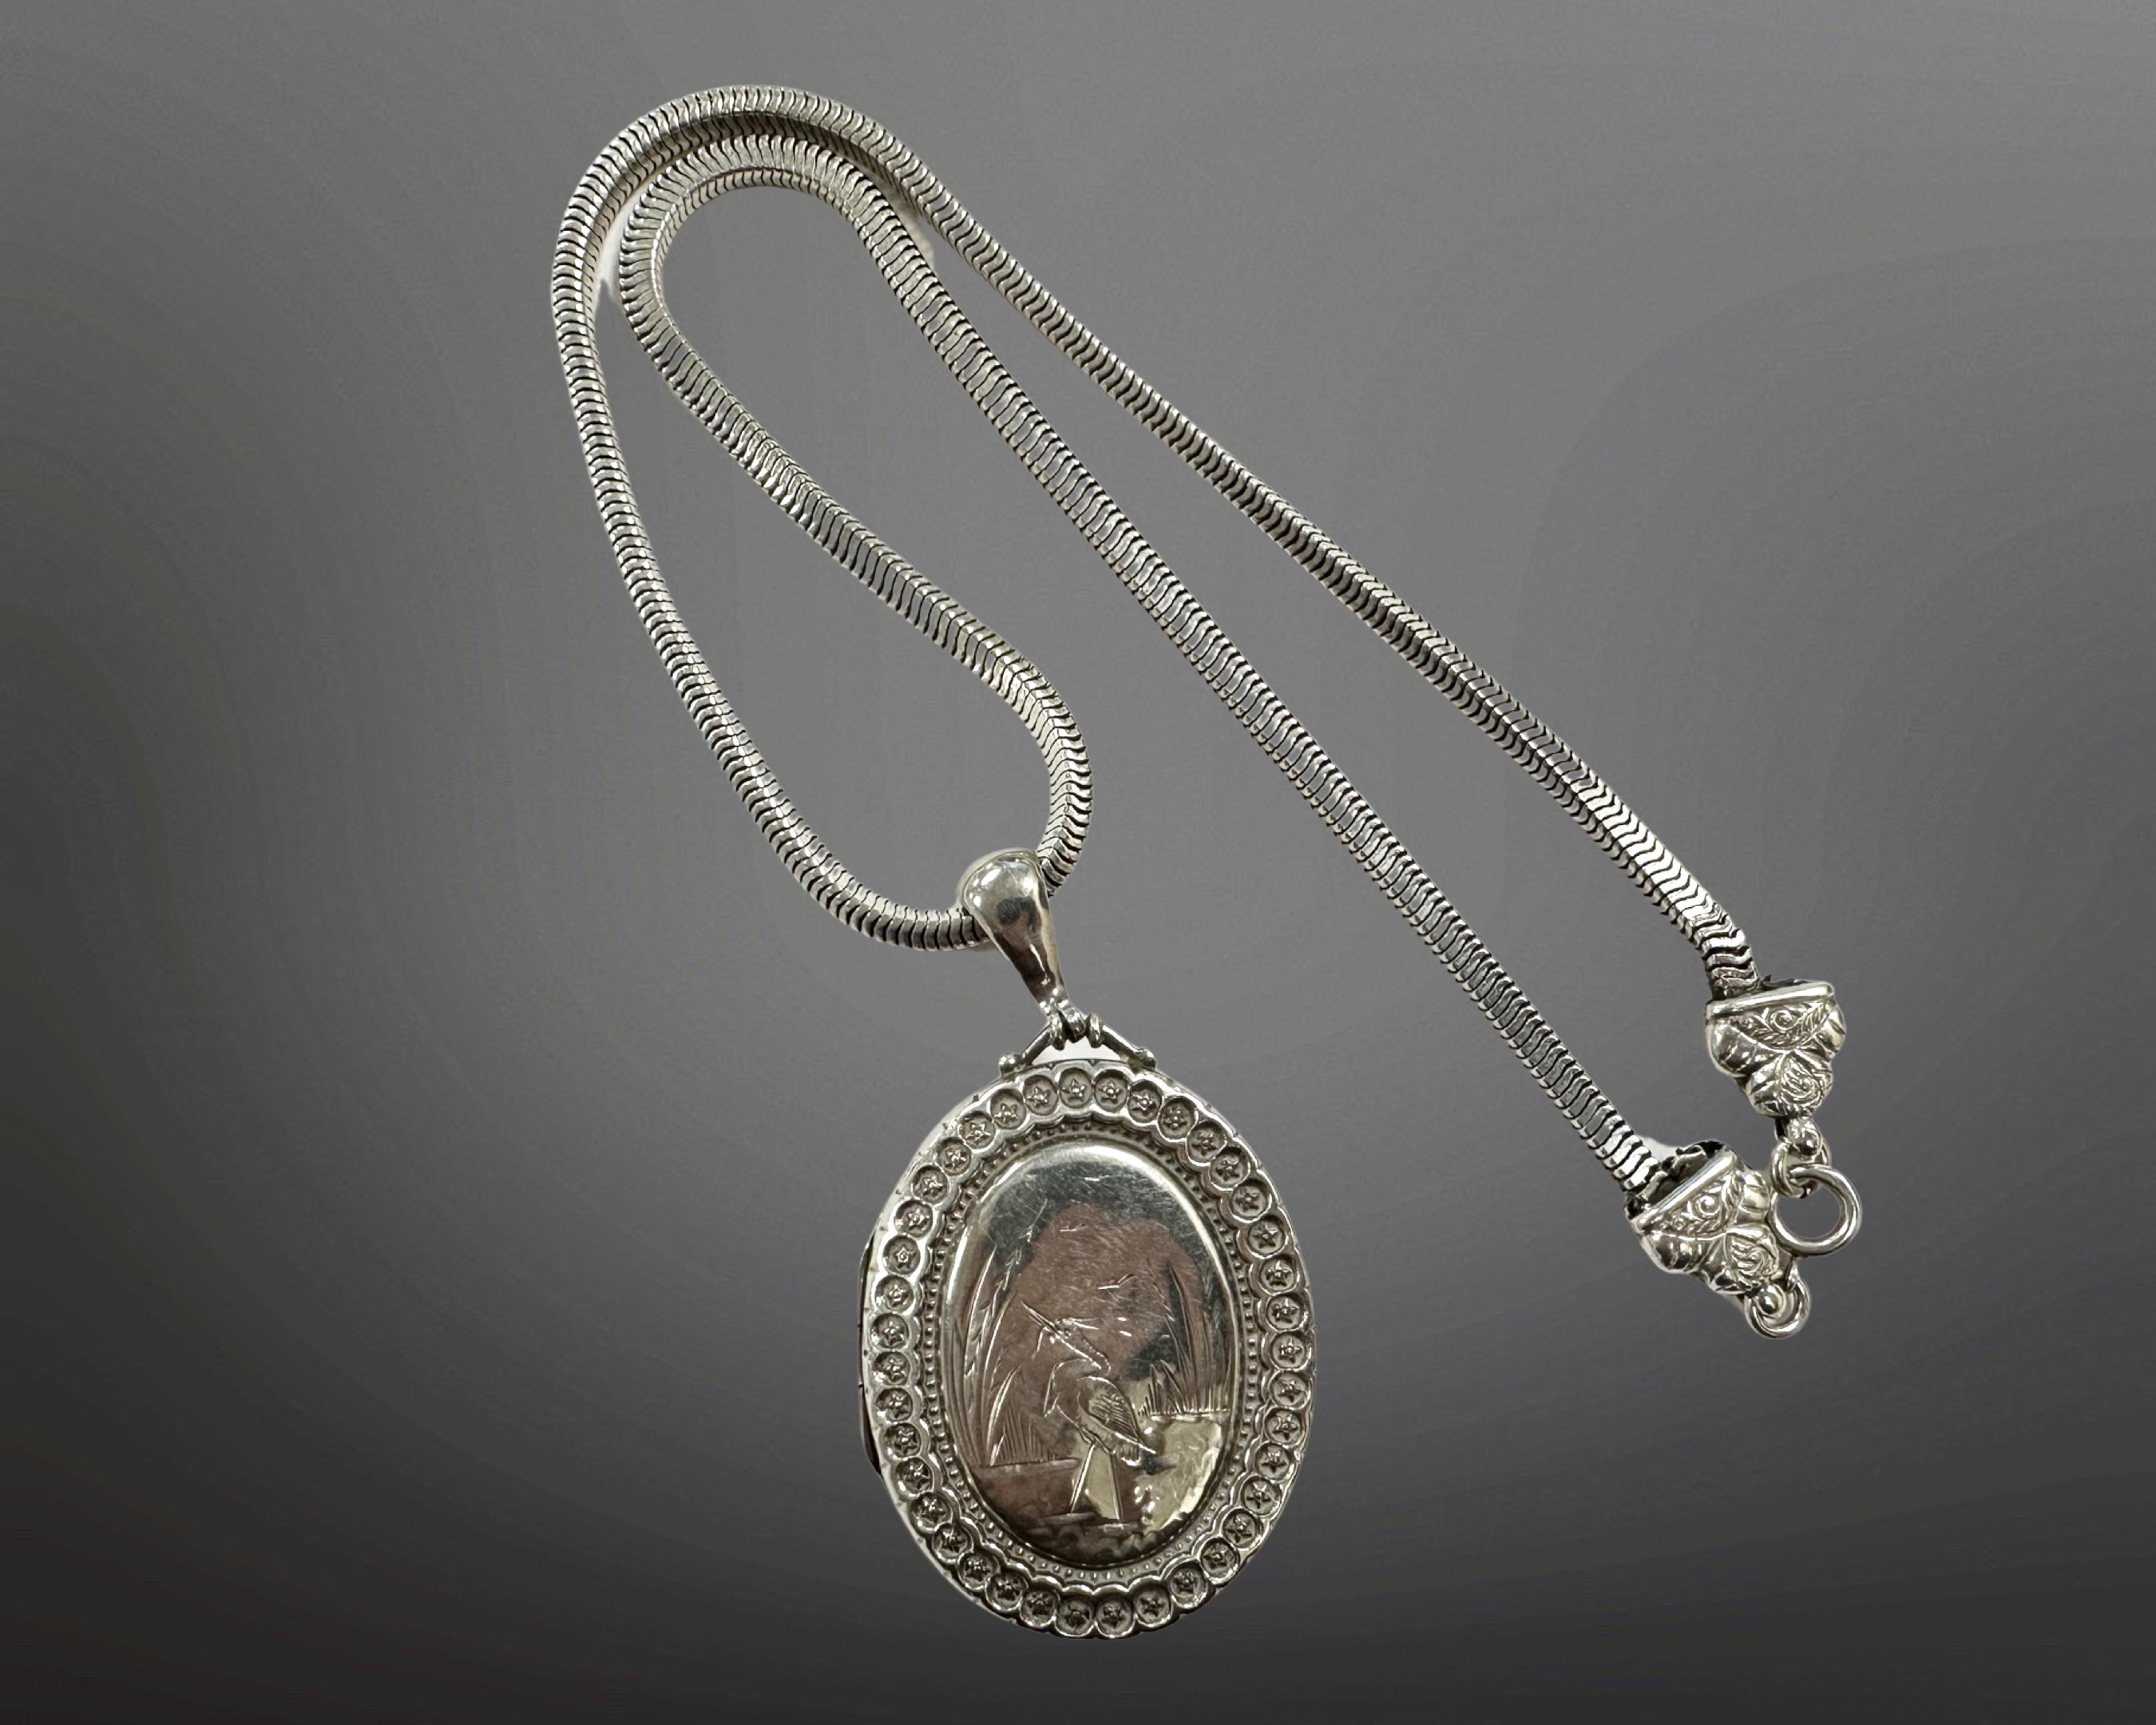 A silver locket on articulated necklace with ornate clasp, length 44cm.